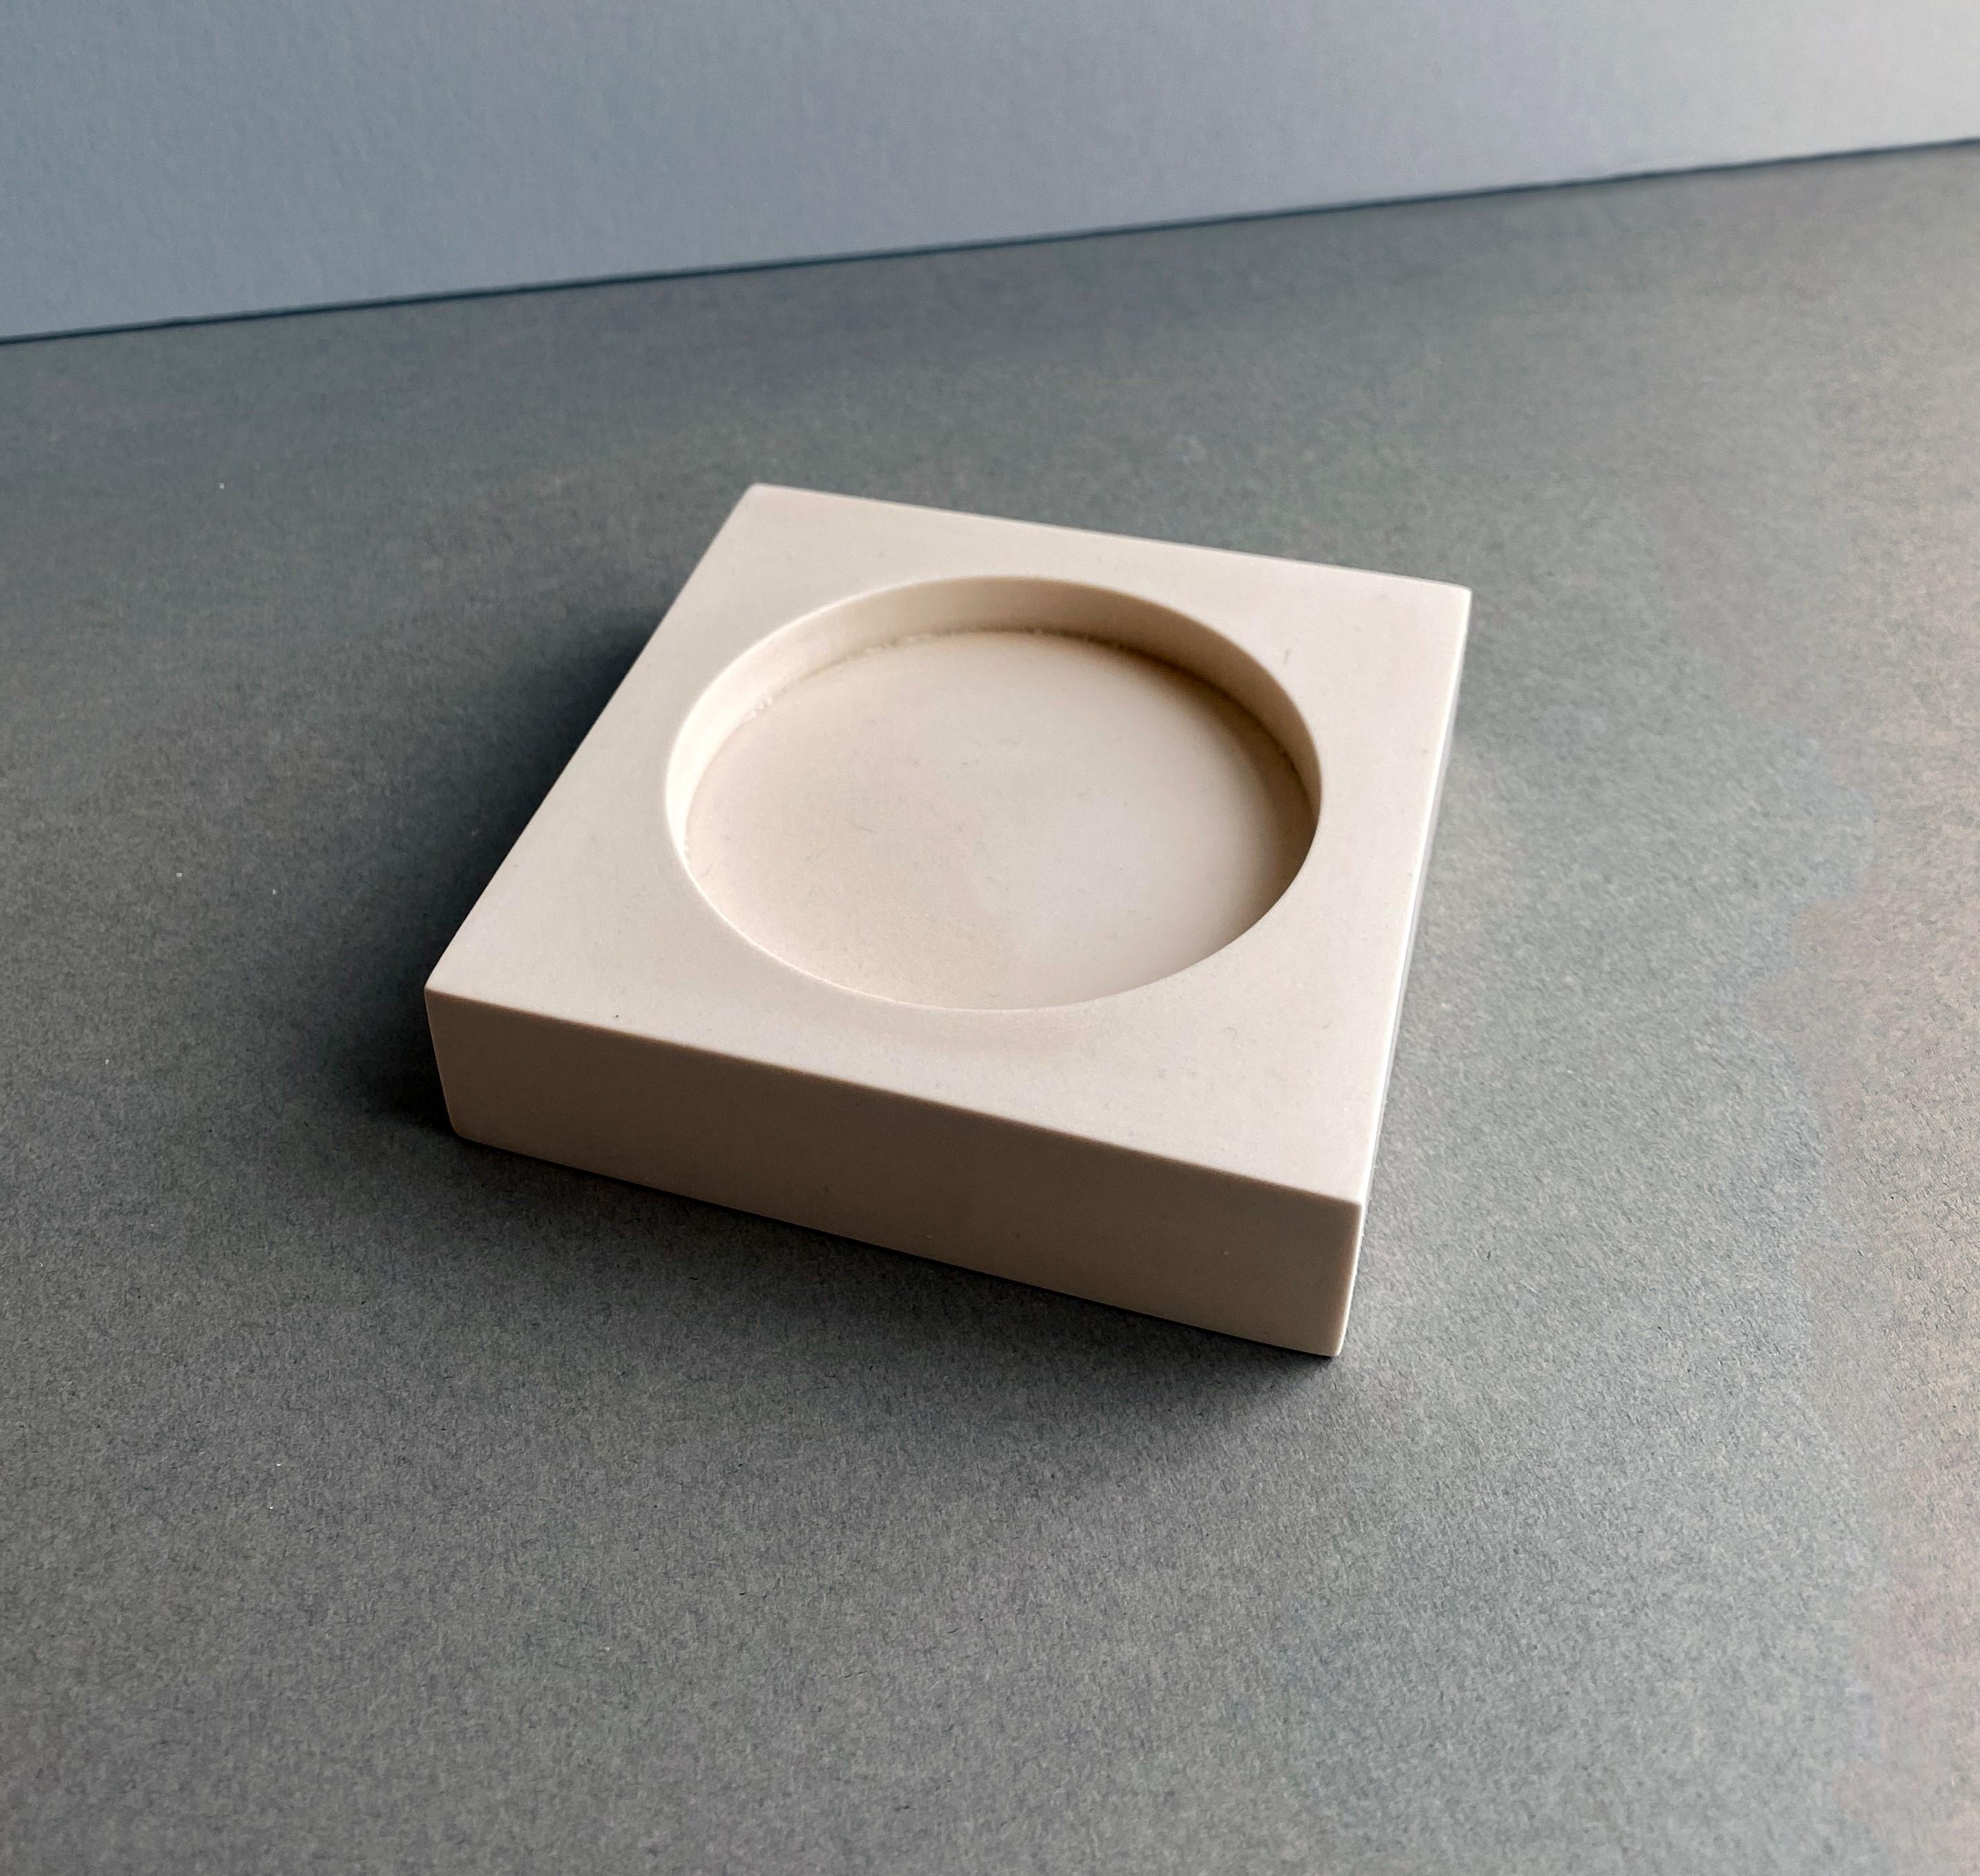 White bowl Mould Project by Theodora Alfredsdottir
Unique
Materials: Jesmonite
Dimensions: 110 x 110 x 25 mm

Theodora Alfredsdottir is a product design studio based in London. 
Theodora is an Icelandic product designer. She holds a bachelor’s